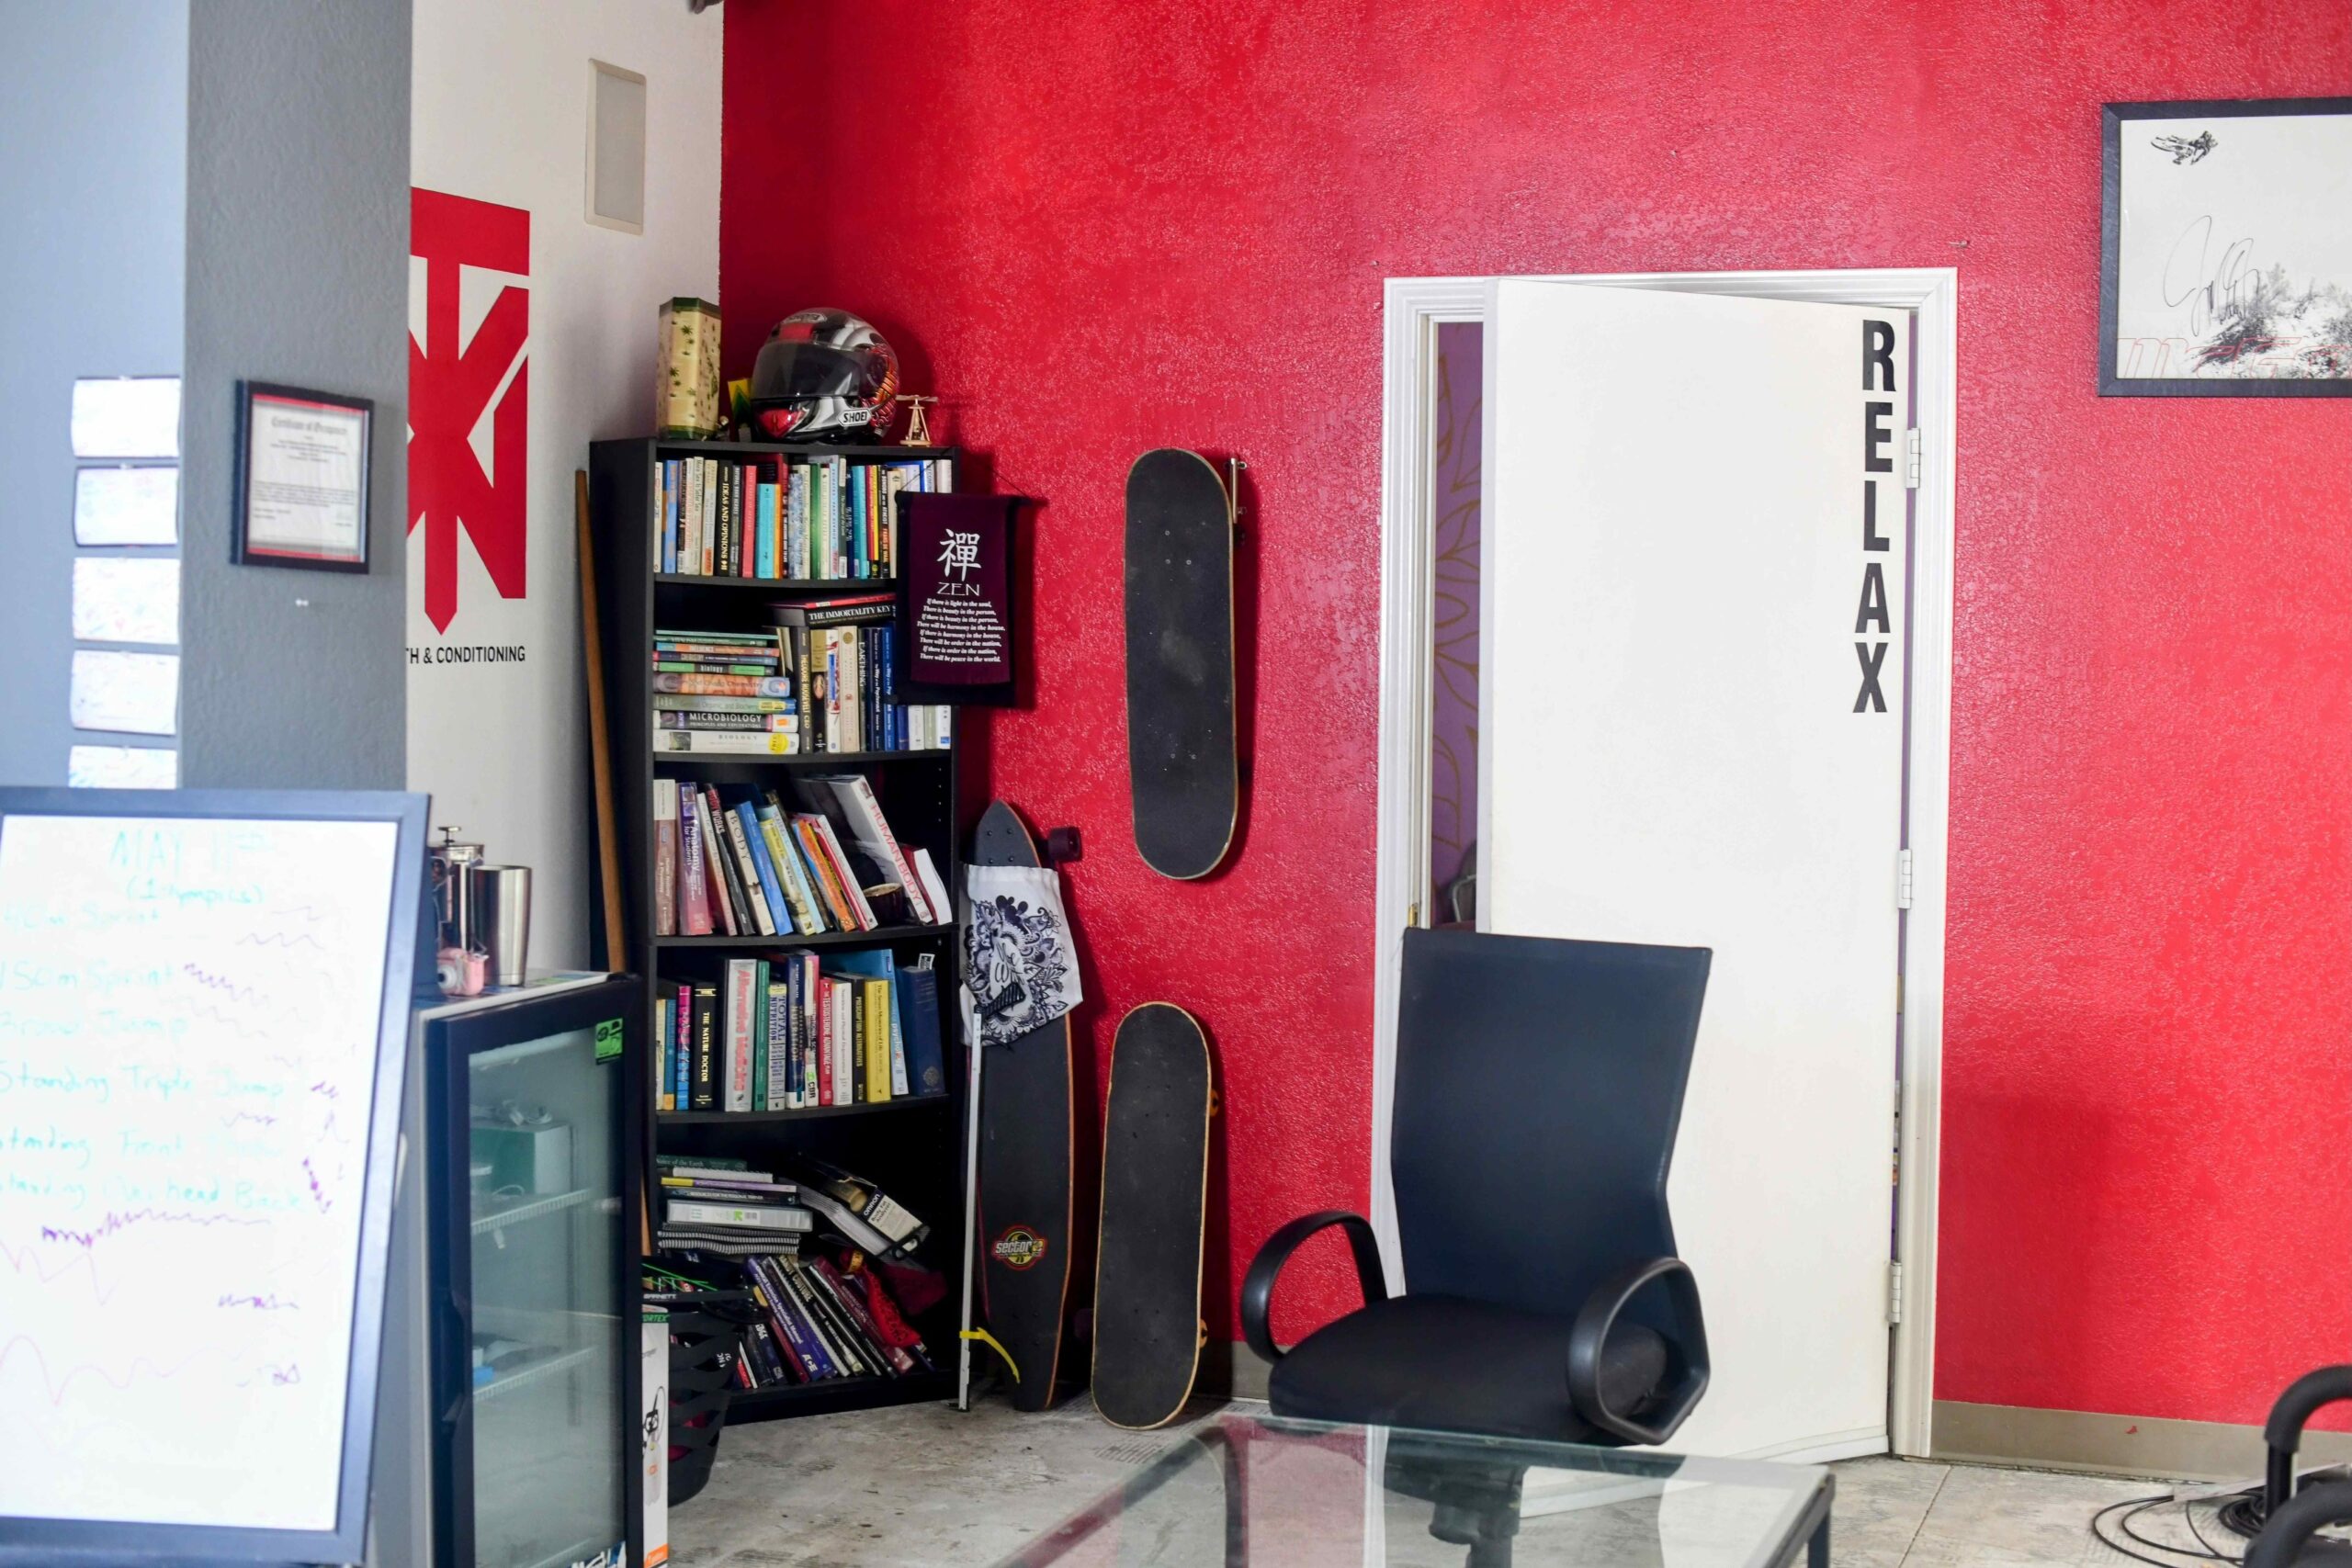 Cozy and inviting office space with a bookshelf filled with books, skateboards mounted on a red wall, a black office chair, and a door labeled 'RELAX', reflecting a relaxed and welcoming atmosphere.